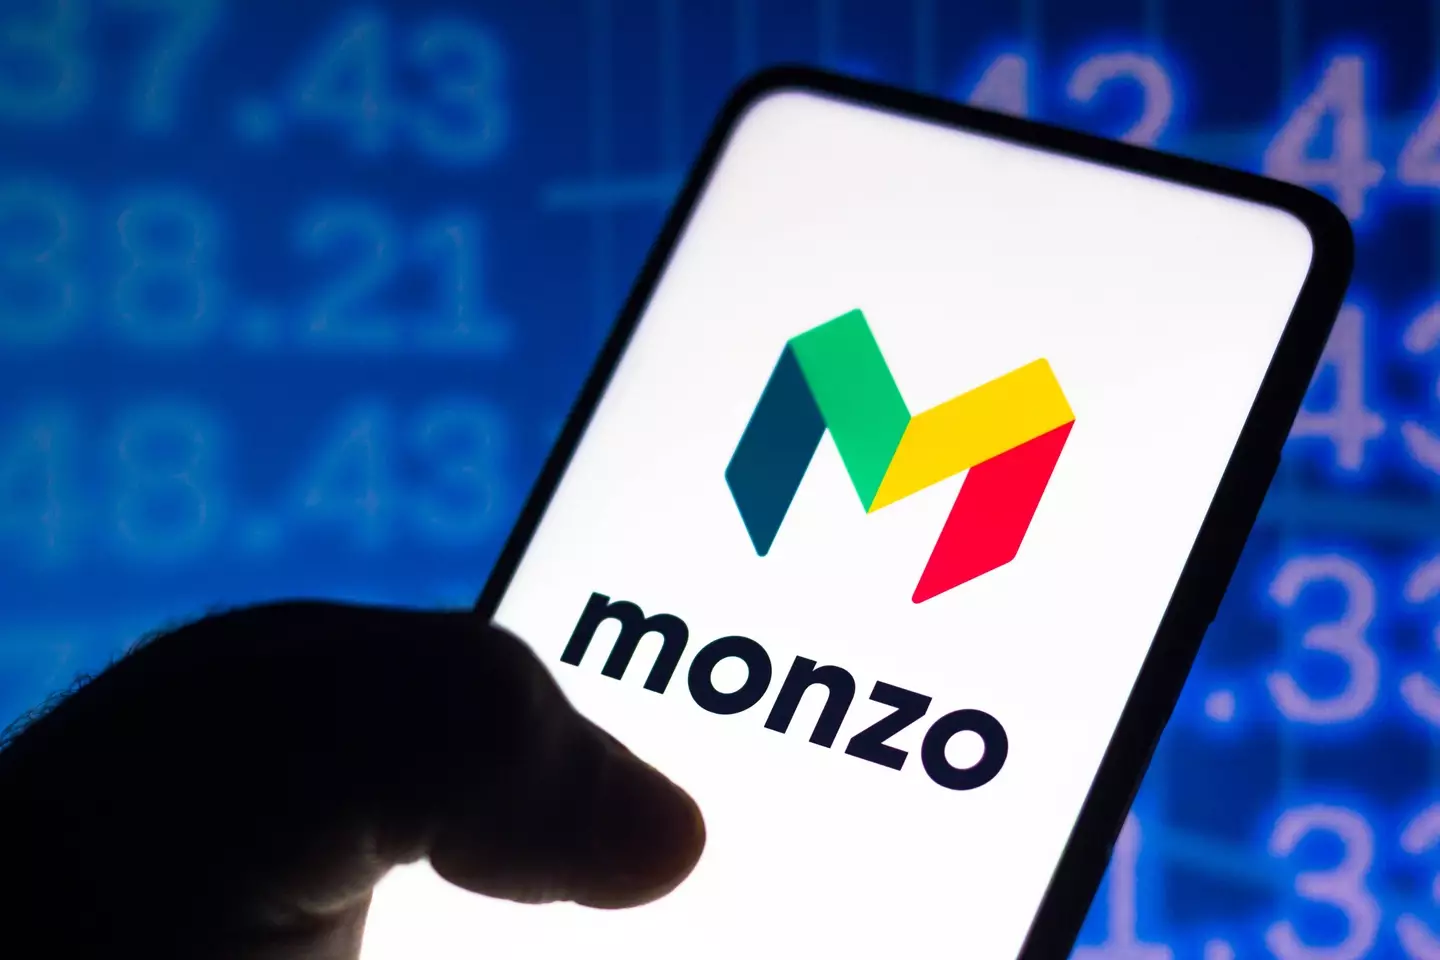 Monzo offers some great perks (Rafael Henrique/SOPA Images/LightRocket via Getty Images)